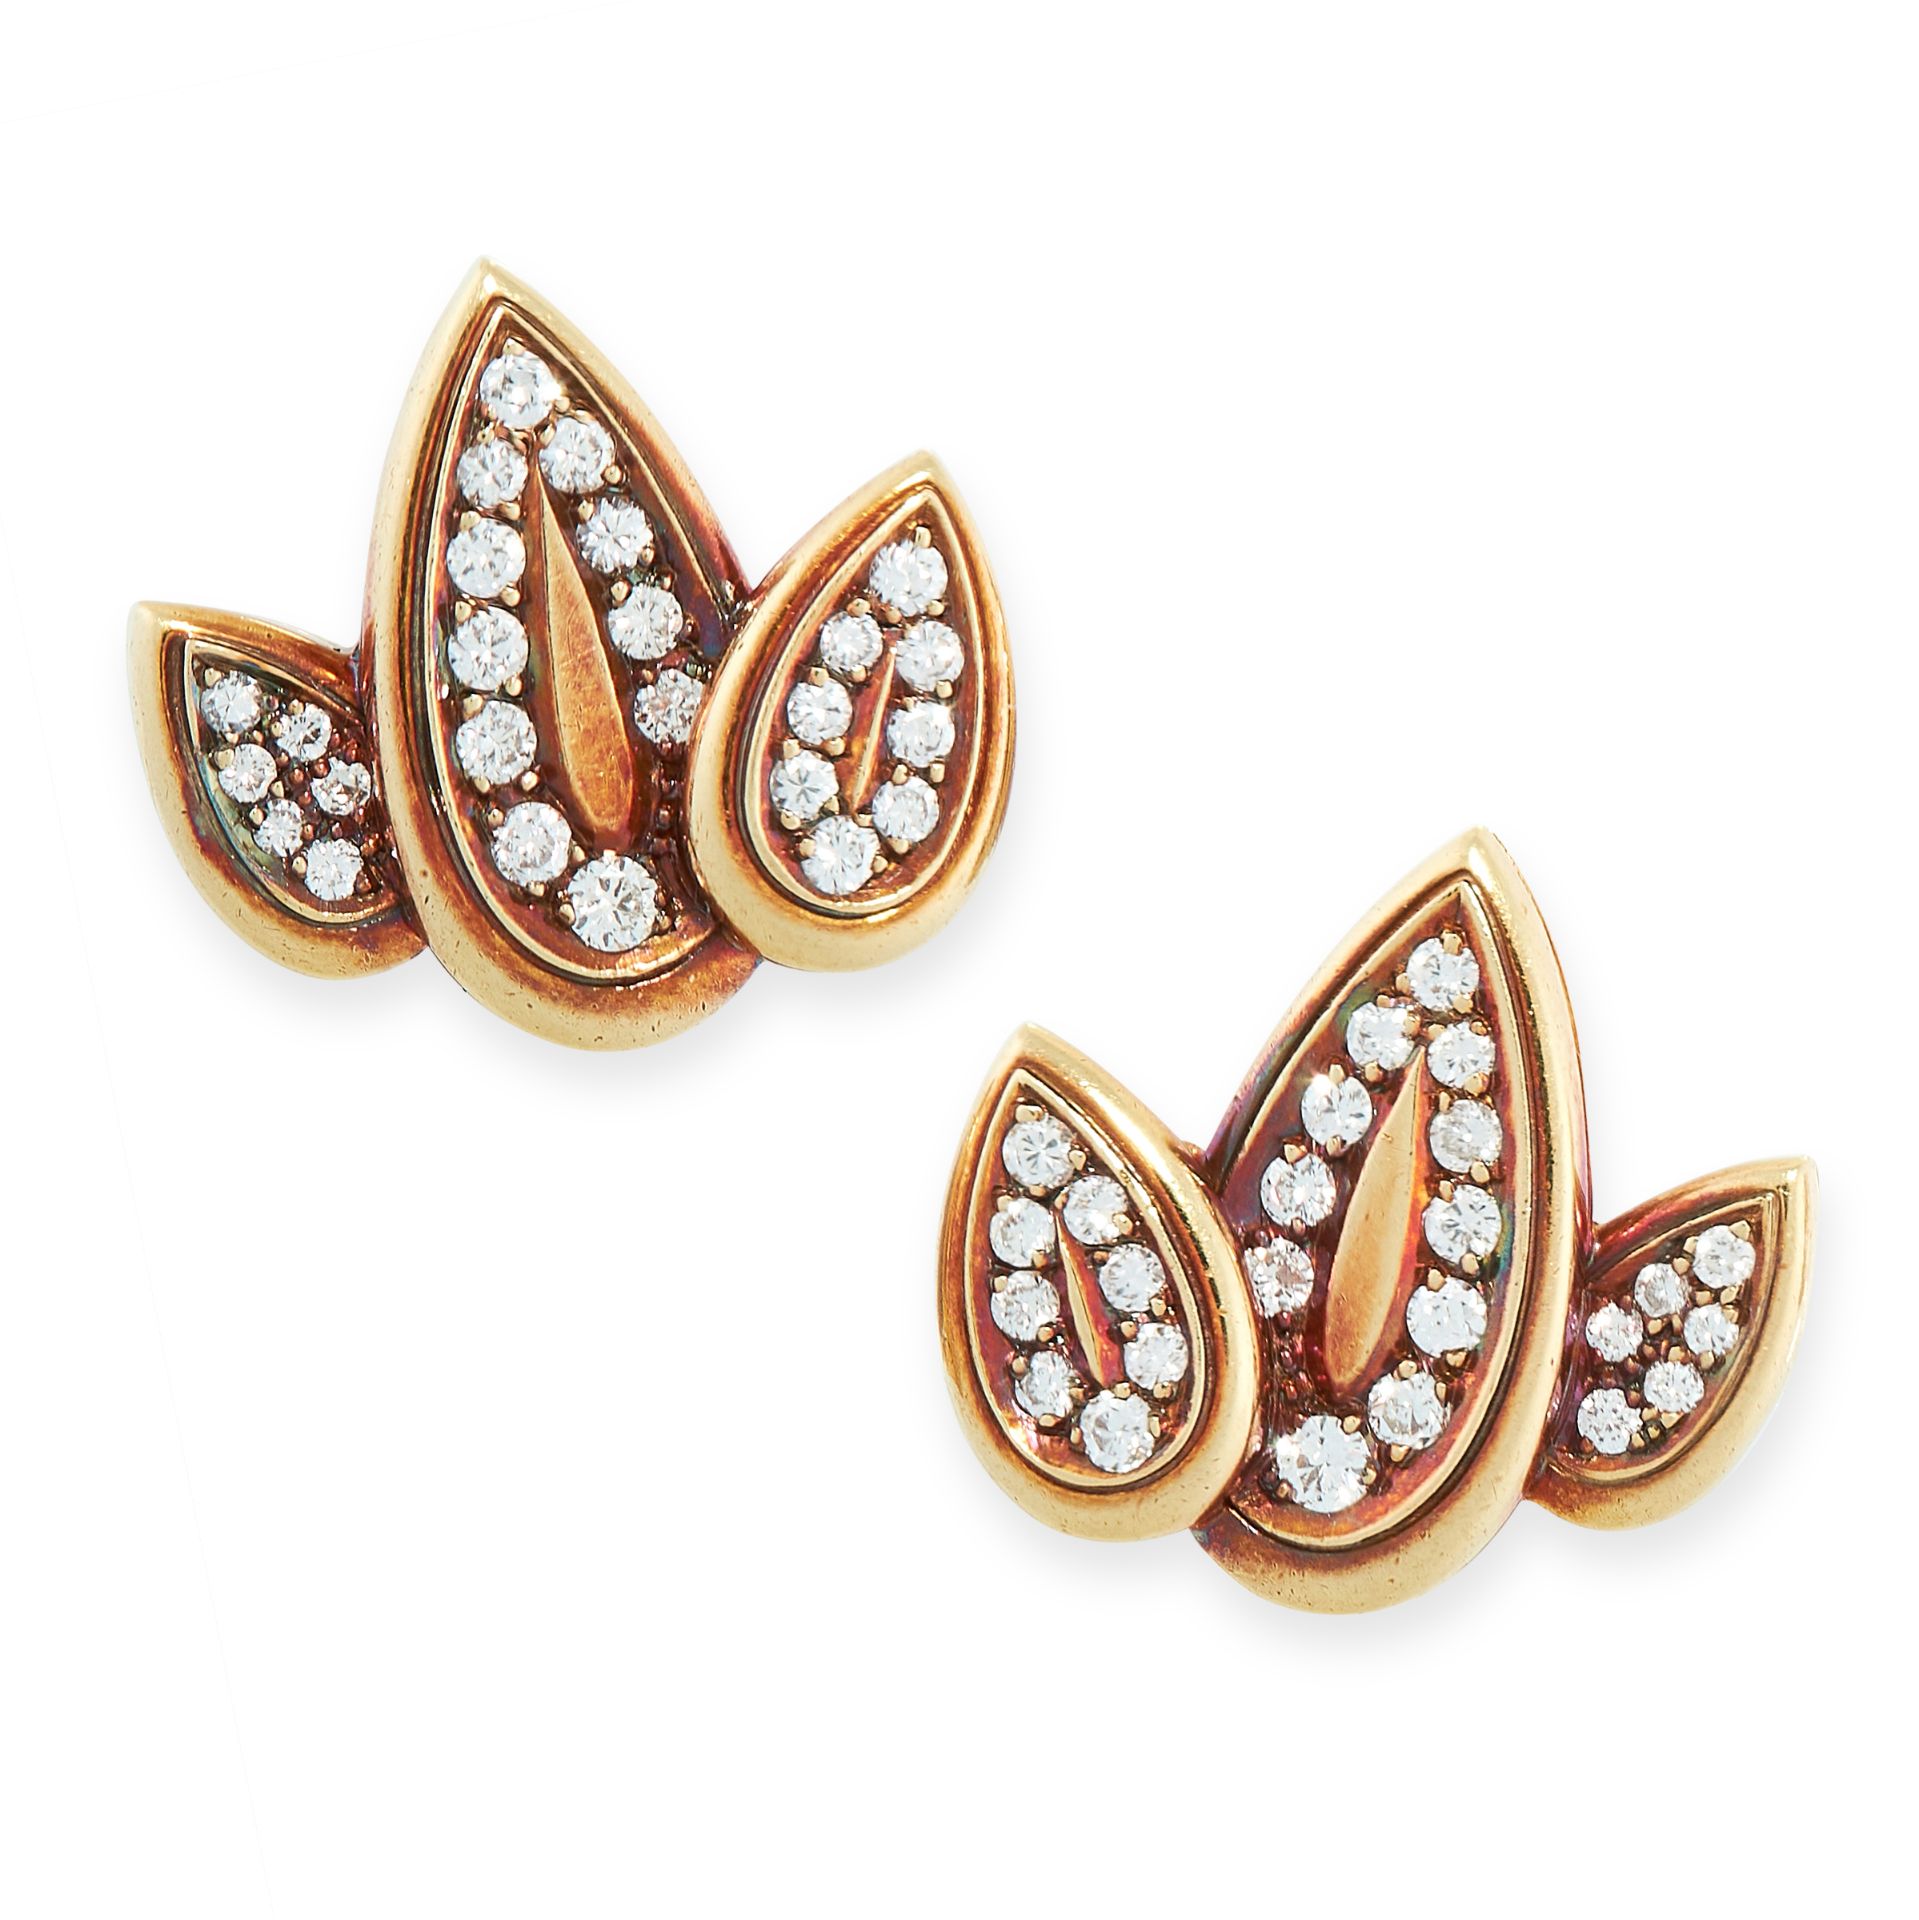 PAIR OF VINTAGE DIAMOND CLIP EARRINGS in yellow gold, each in the form of a leaf, set with rows of